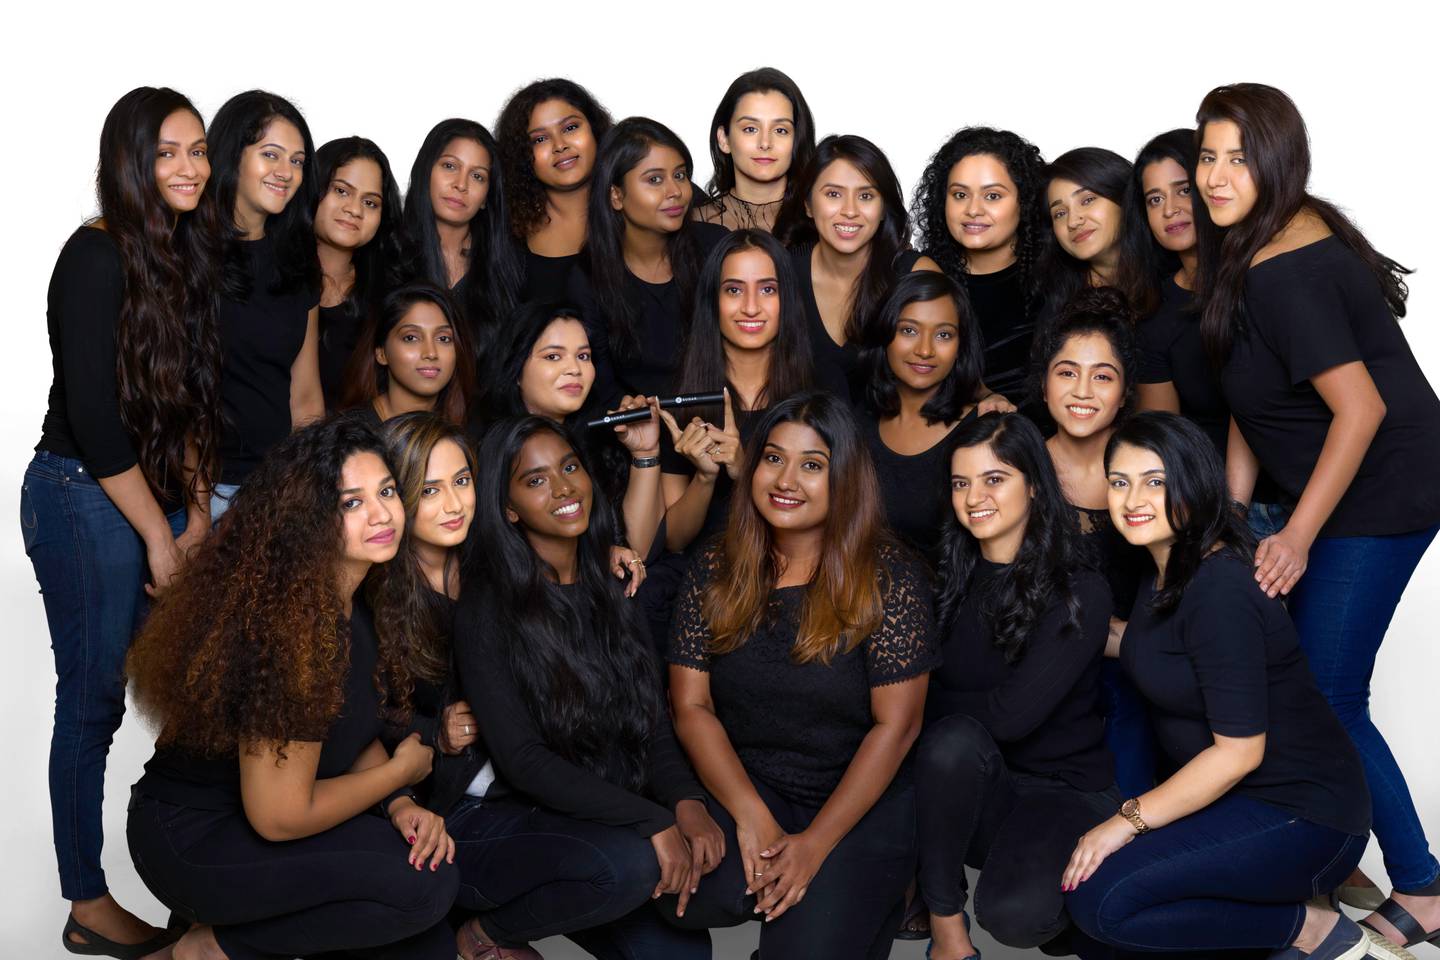 Sugar Cosmetics co-founder and CEO Vineeta Singh with her team in a campaign shoot for the brand in 2019.